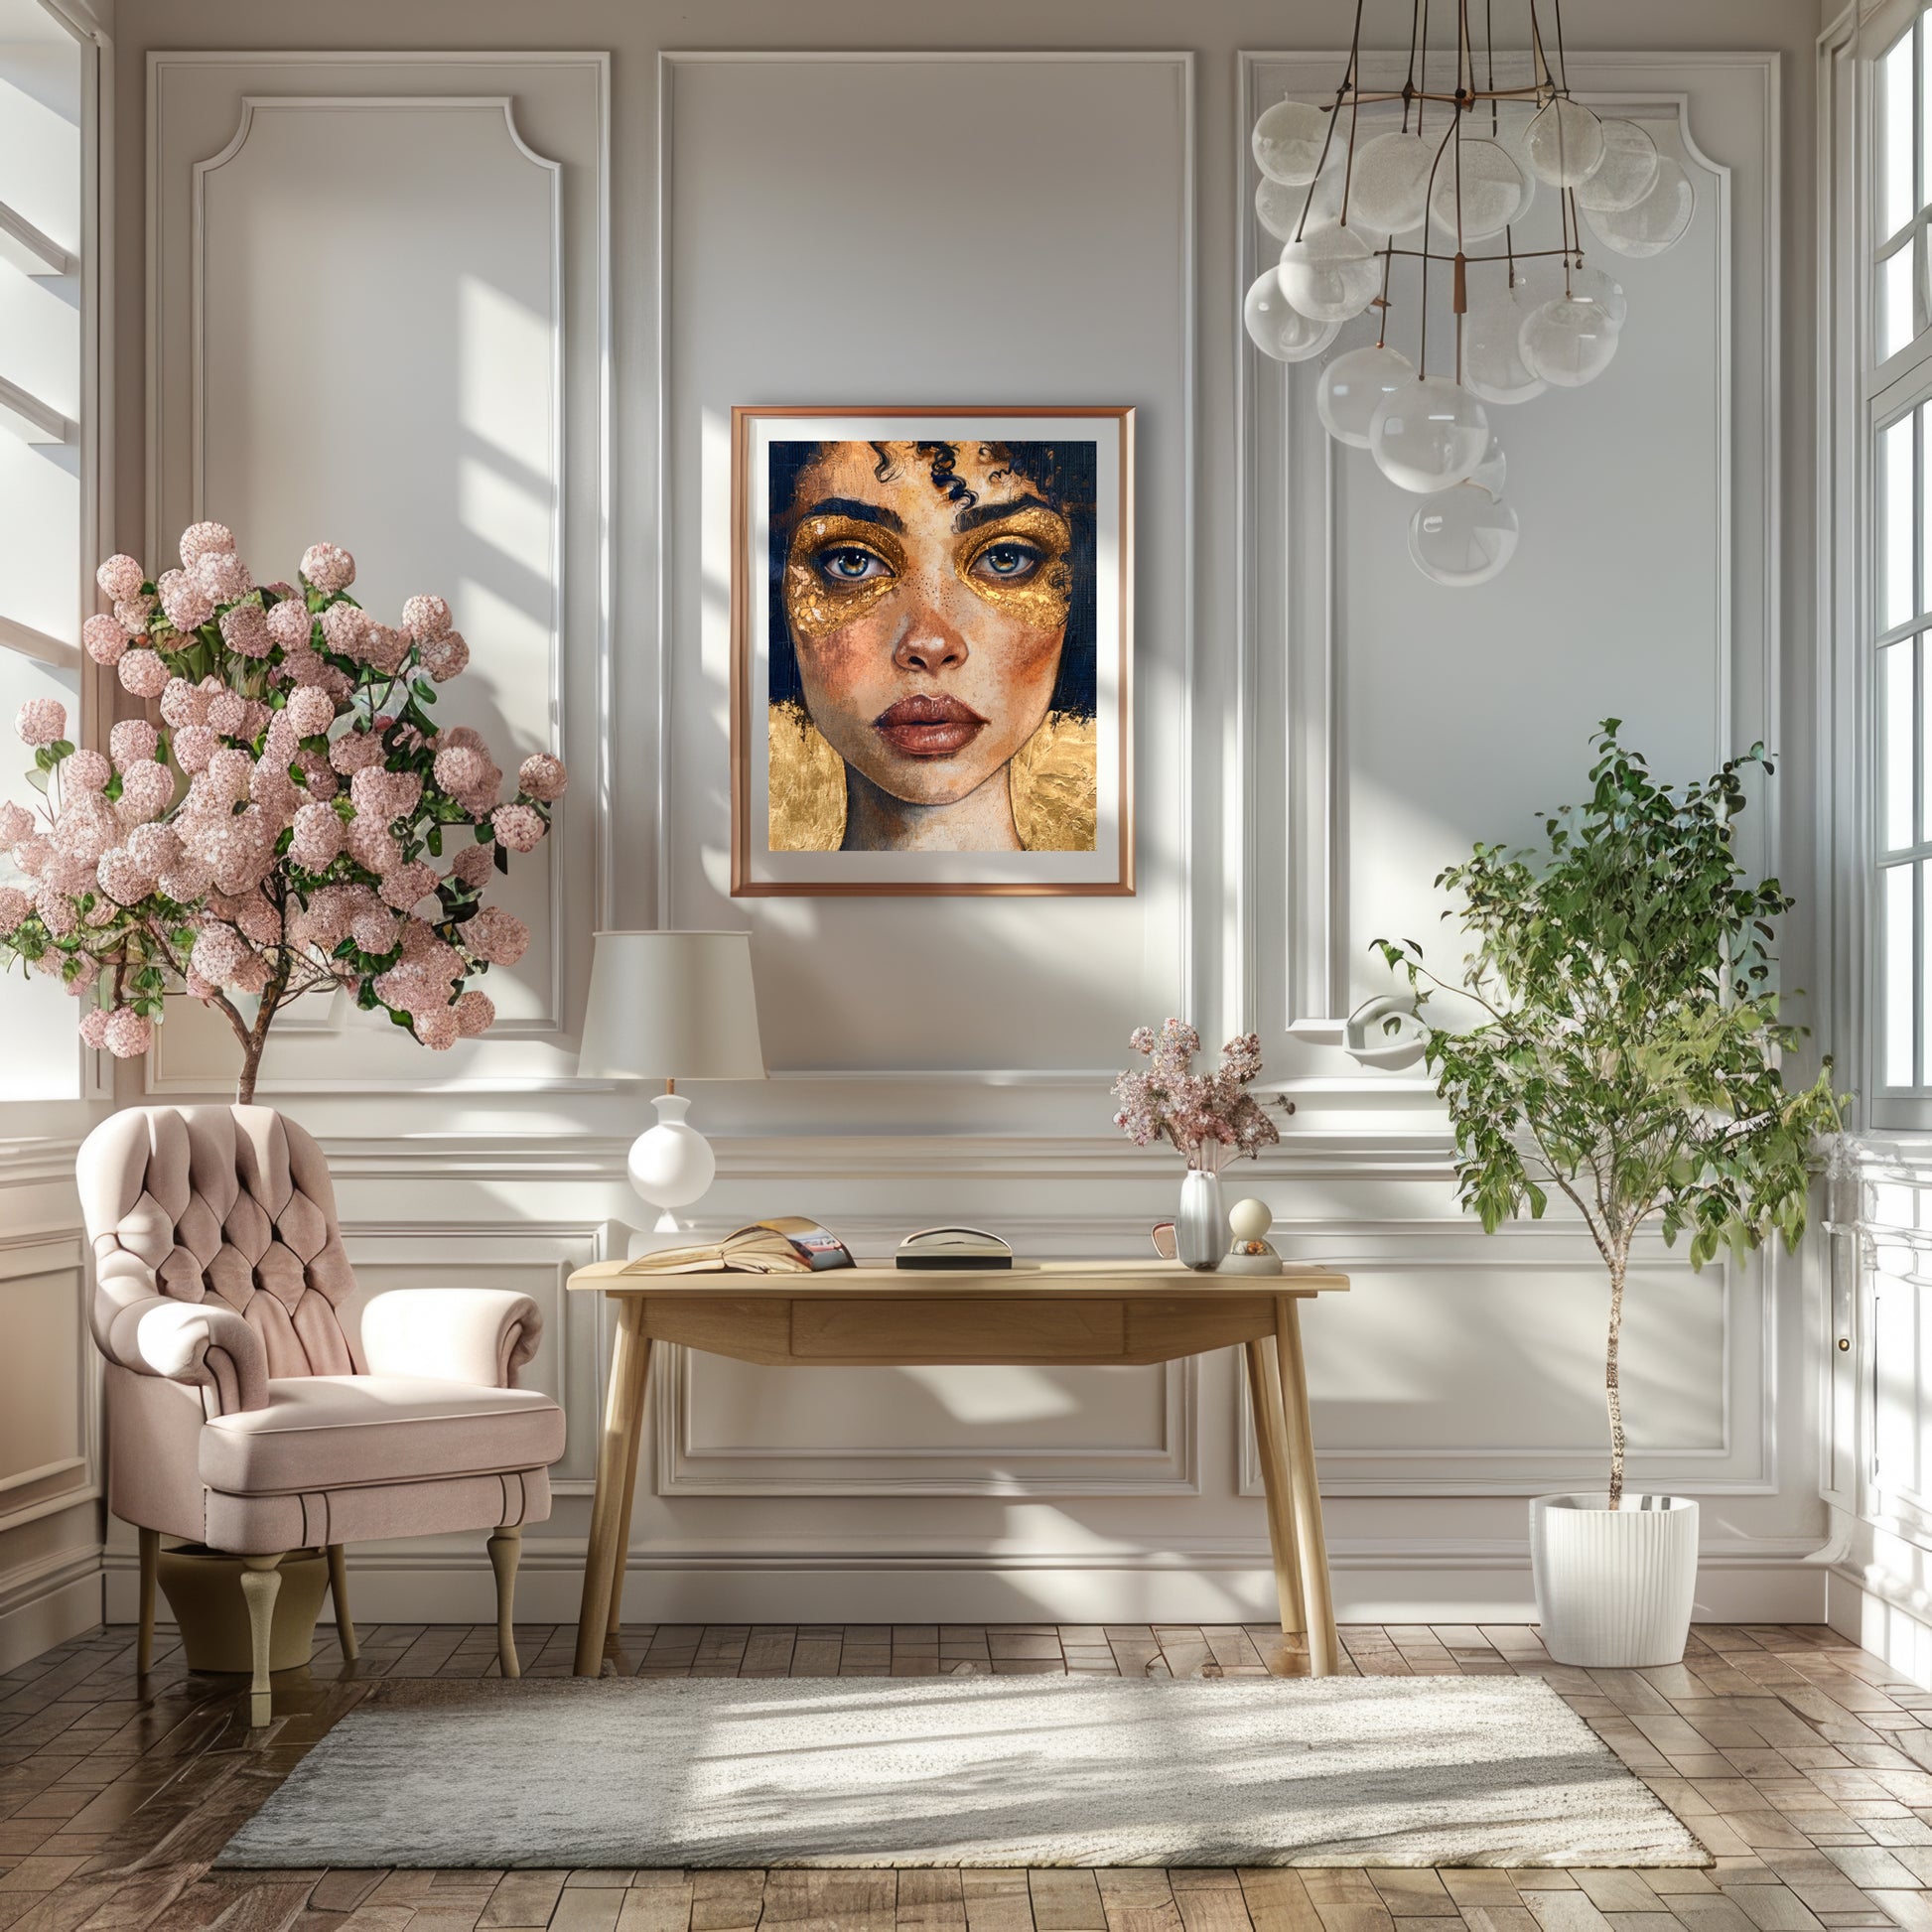 Fine art print depicting a woman's face with golden eye makeup from the Heart Of Gold collection.